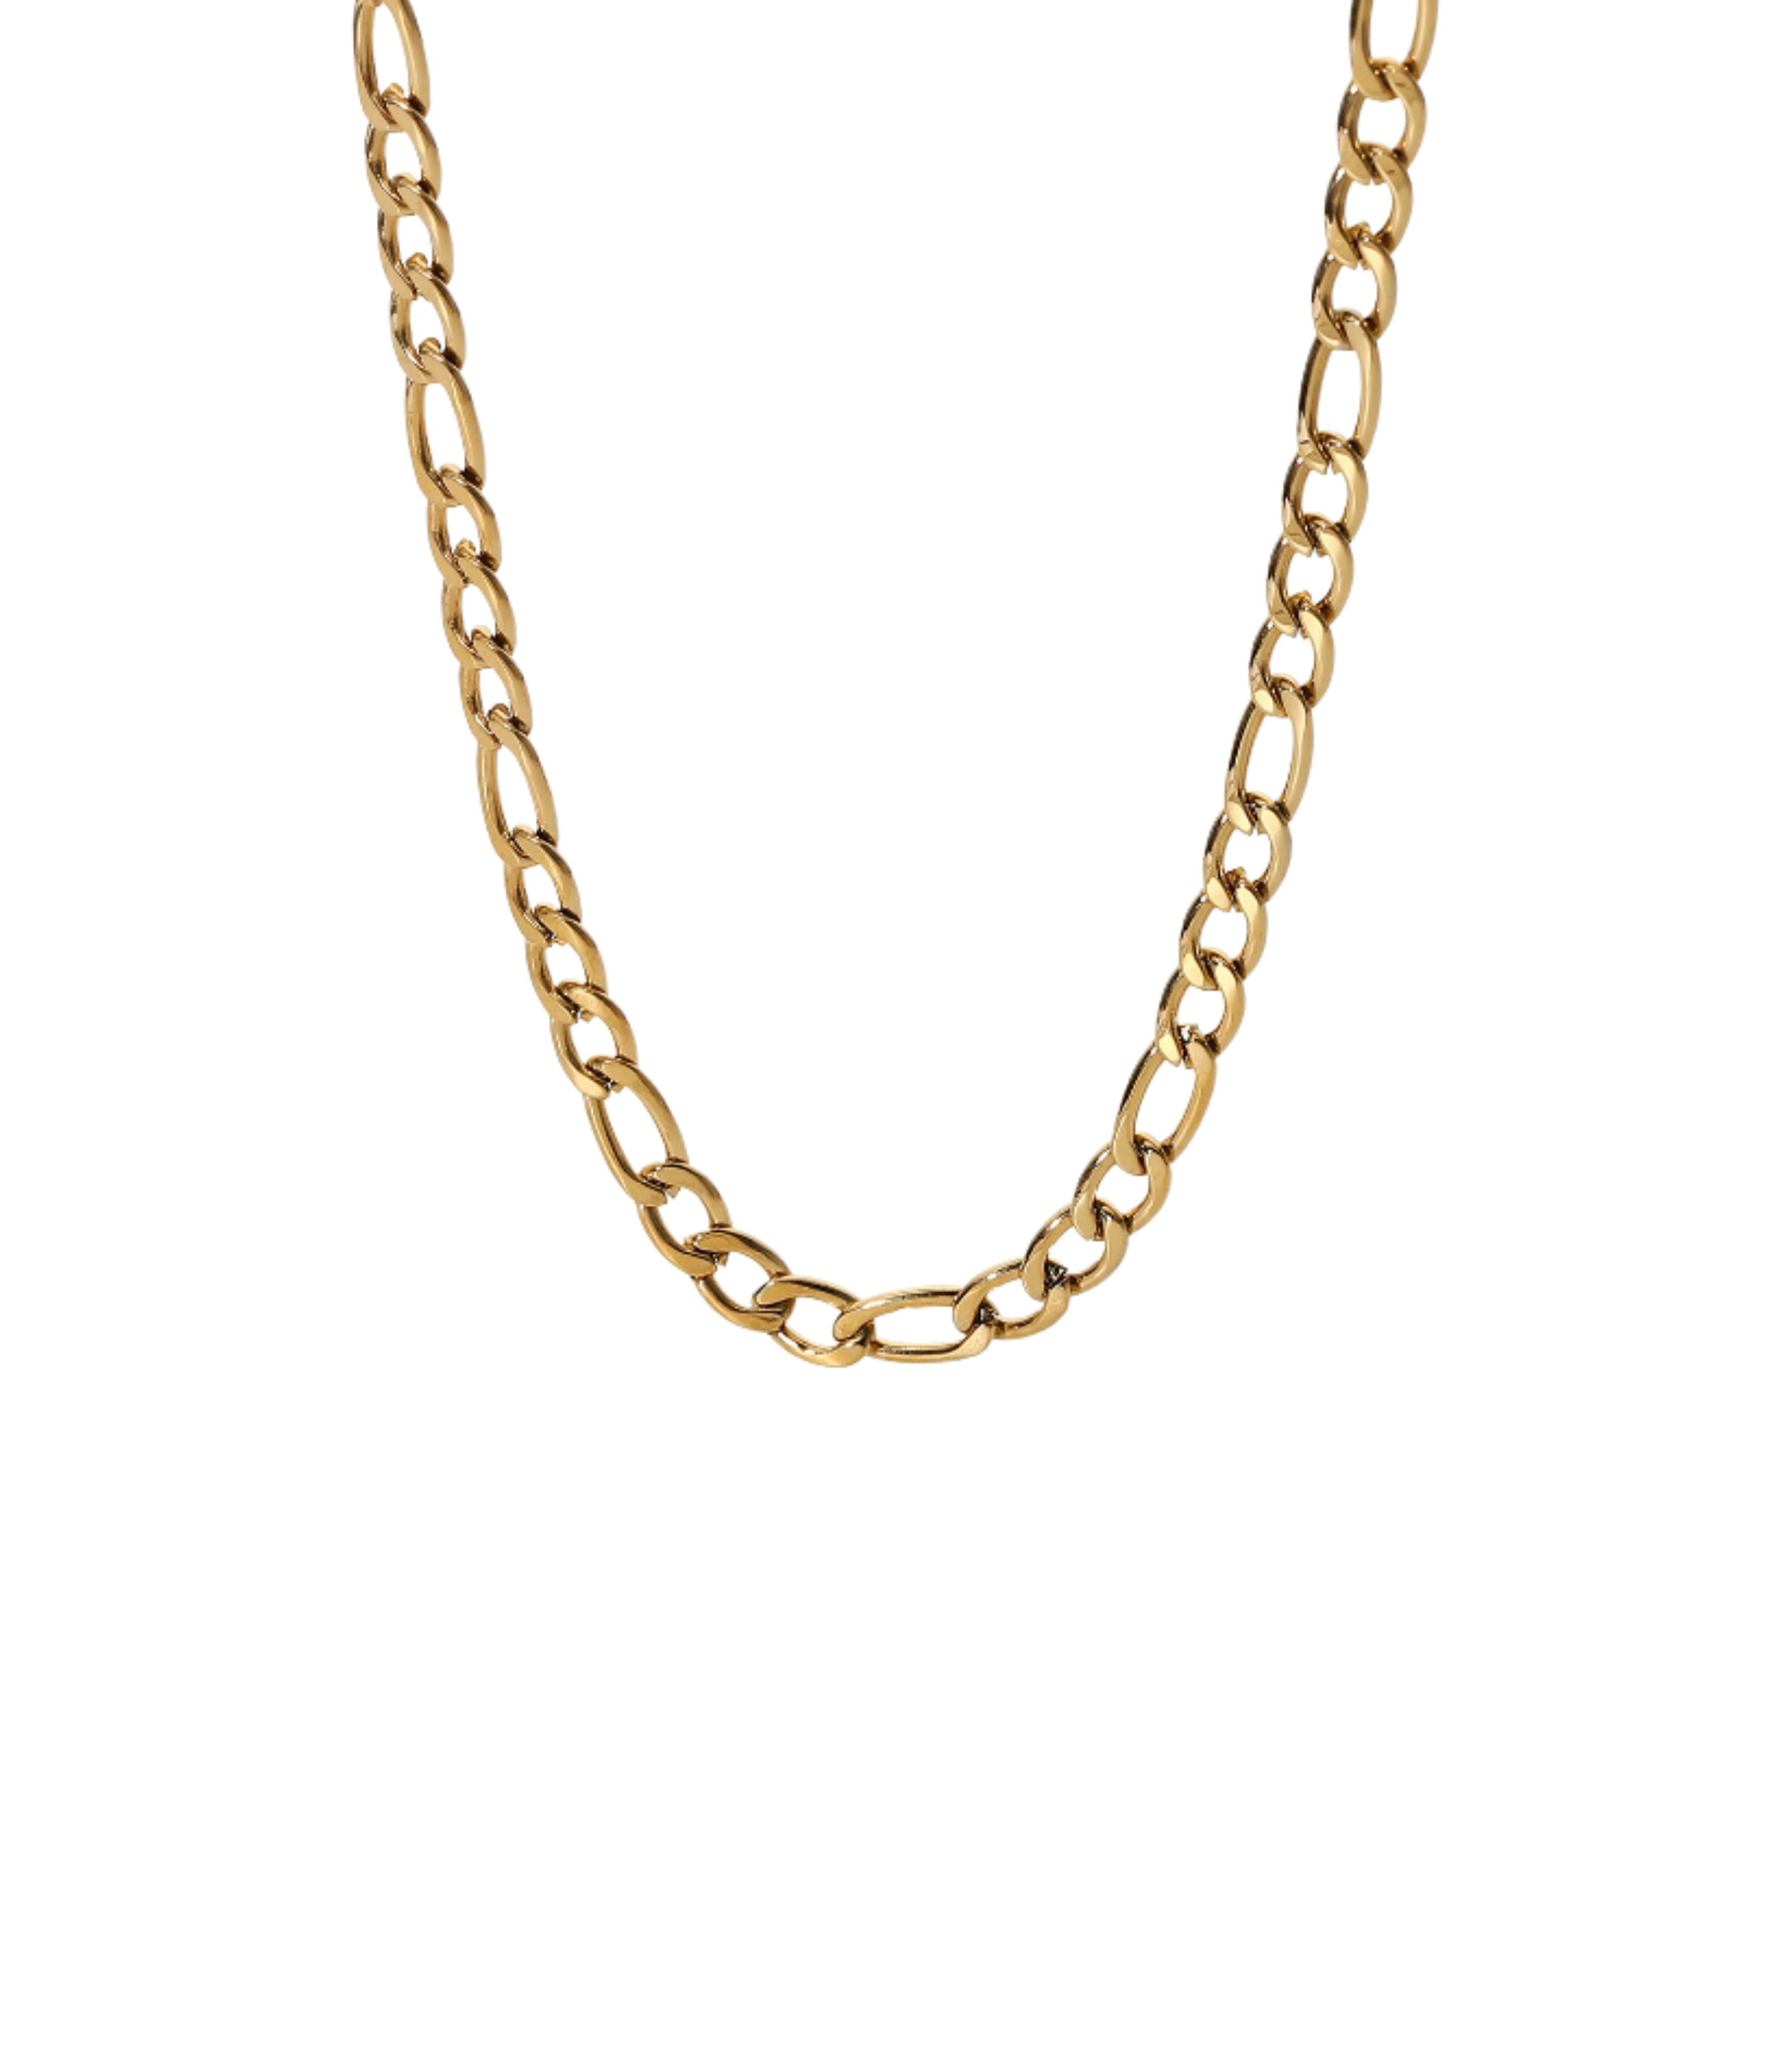 Figaro chain link necklace